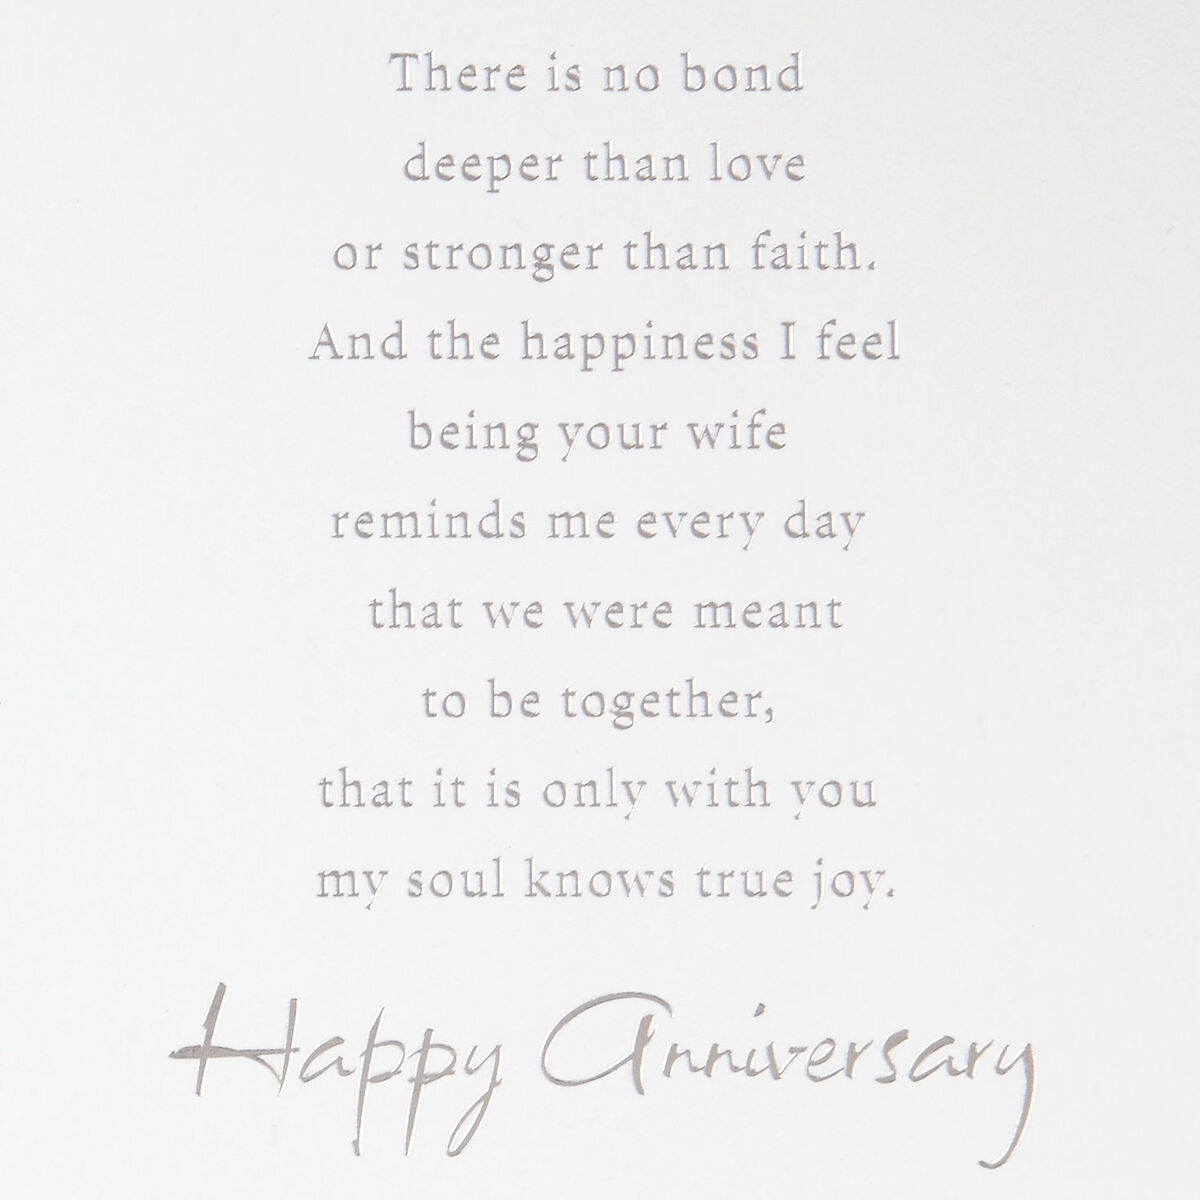 Gold Heart Anniversary Card for Husband - Greeting Cards - Hallmark